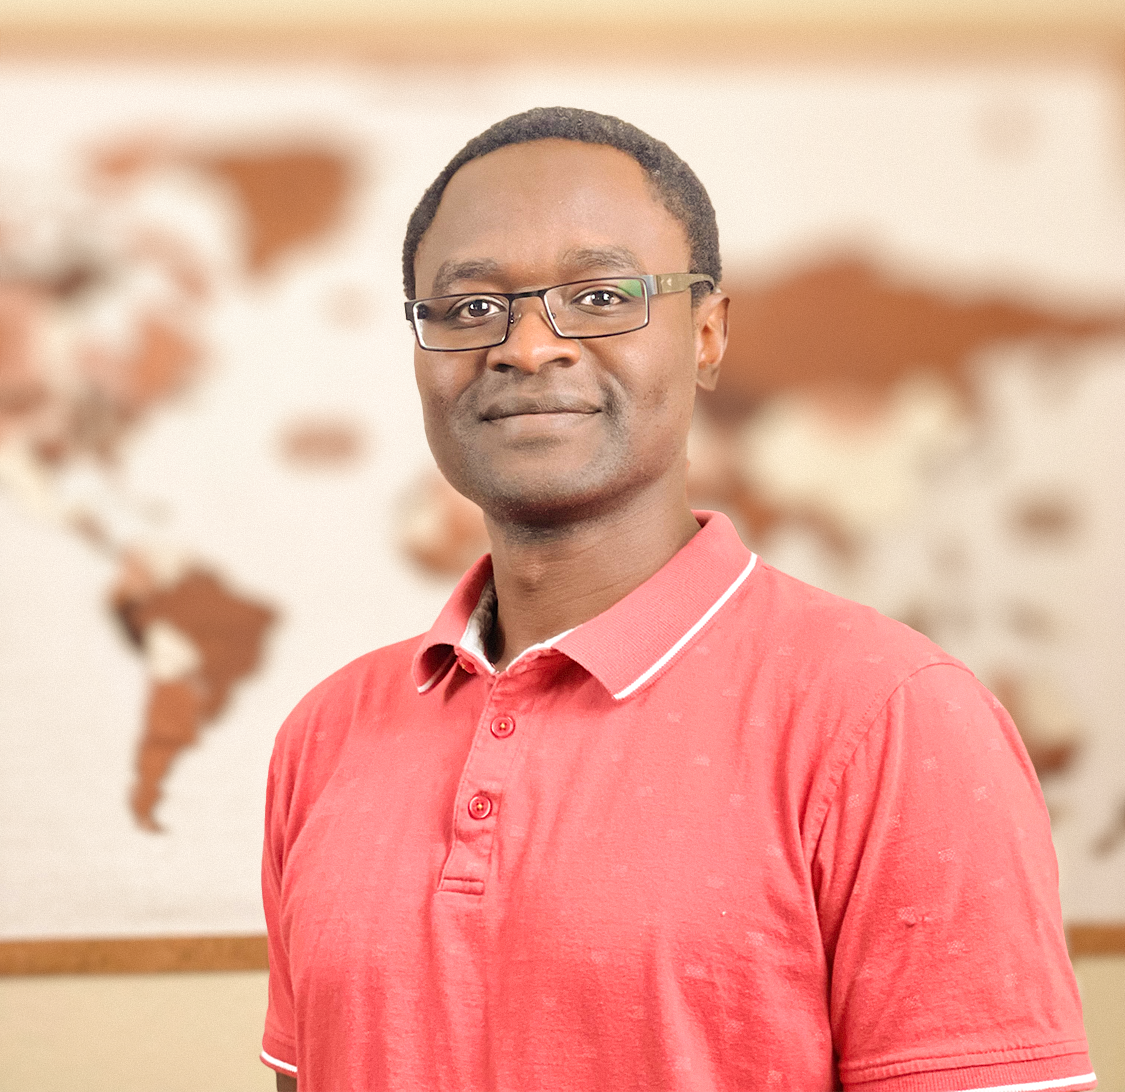 pictured - speaker Evans Onyango in a salmon colored polo shirt and clean rimmed glasses smiling and standing in front of a Earth-tone colored world map